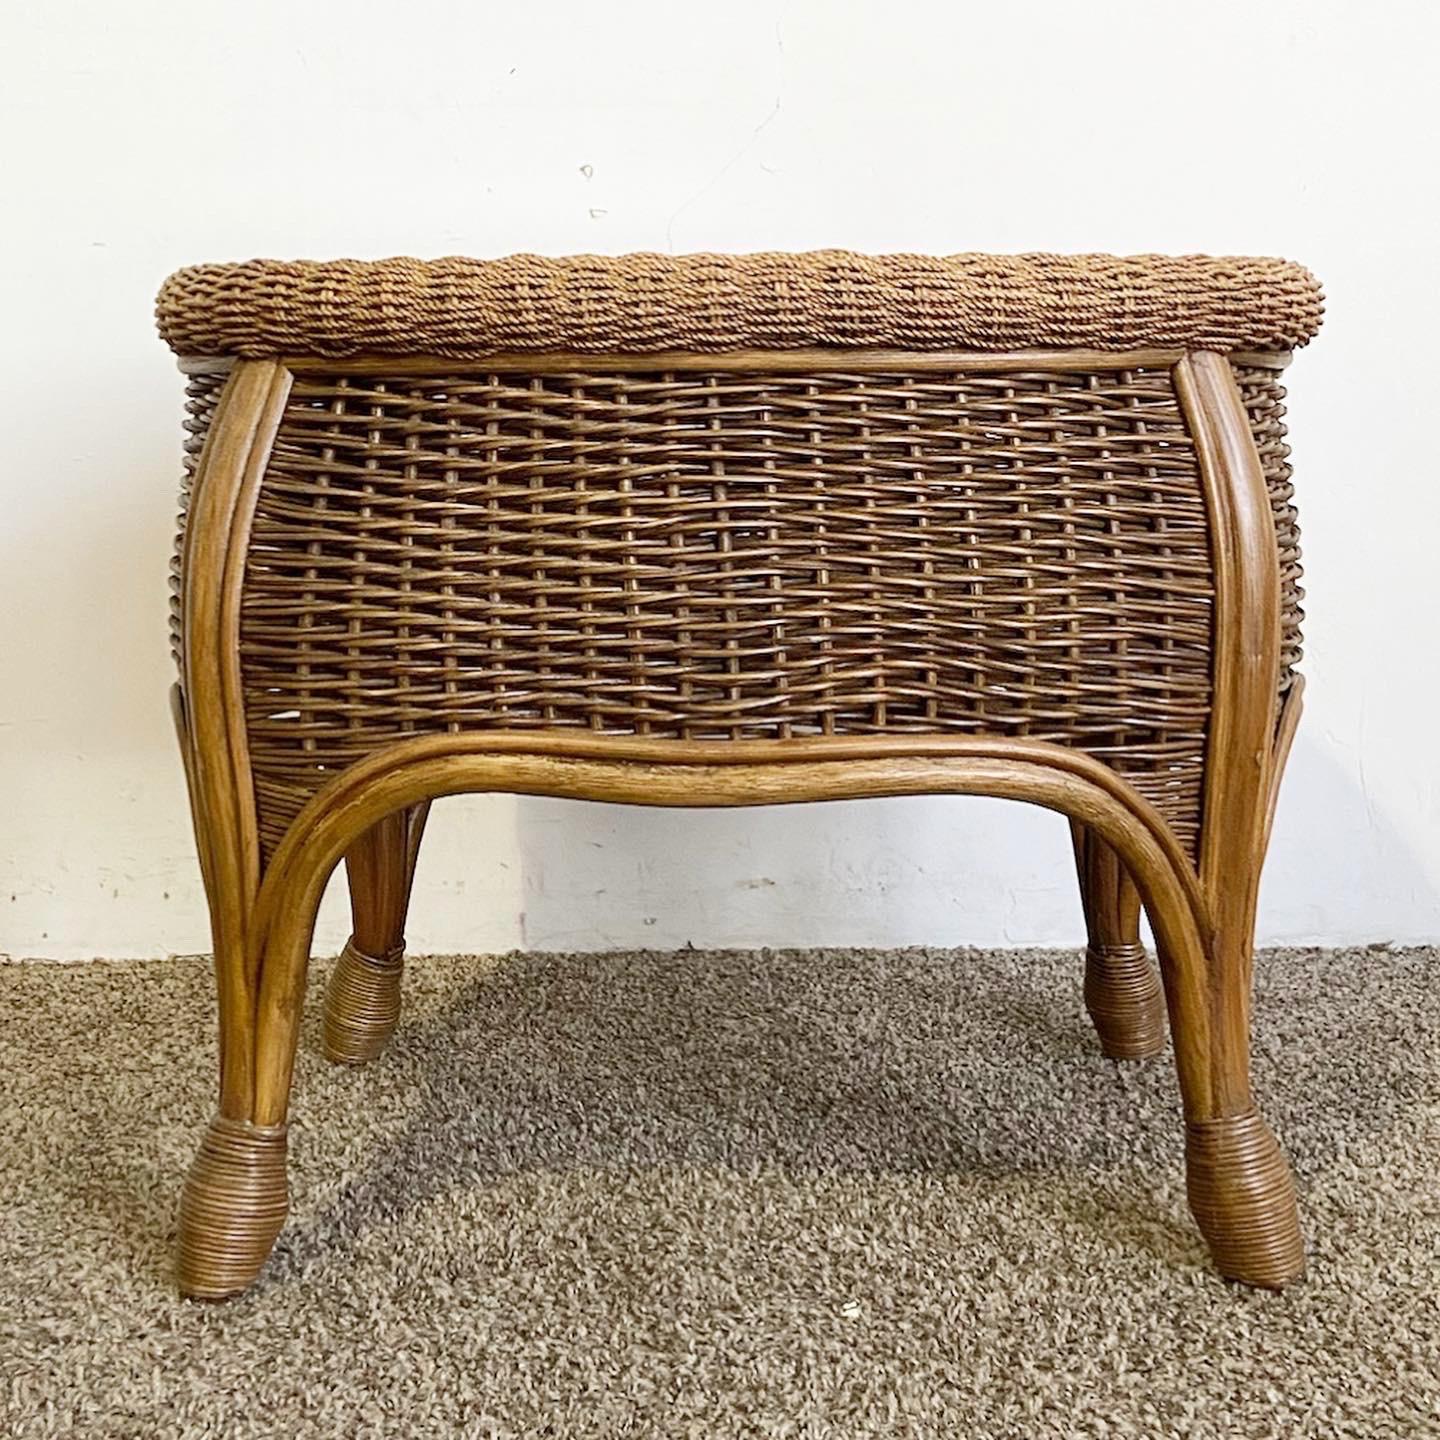 Introduce a touch of natural allure into your space with the captivating Boho Bamboo Rattan Wicker Table. This remarkable piece harmoniously fuses organic bamboo, rattan, and wicker elements, gracefully crowned with a sleek glass top, resulting in